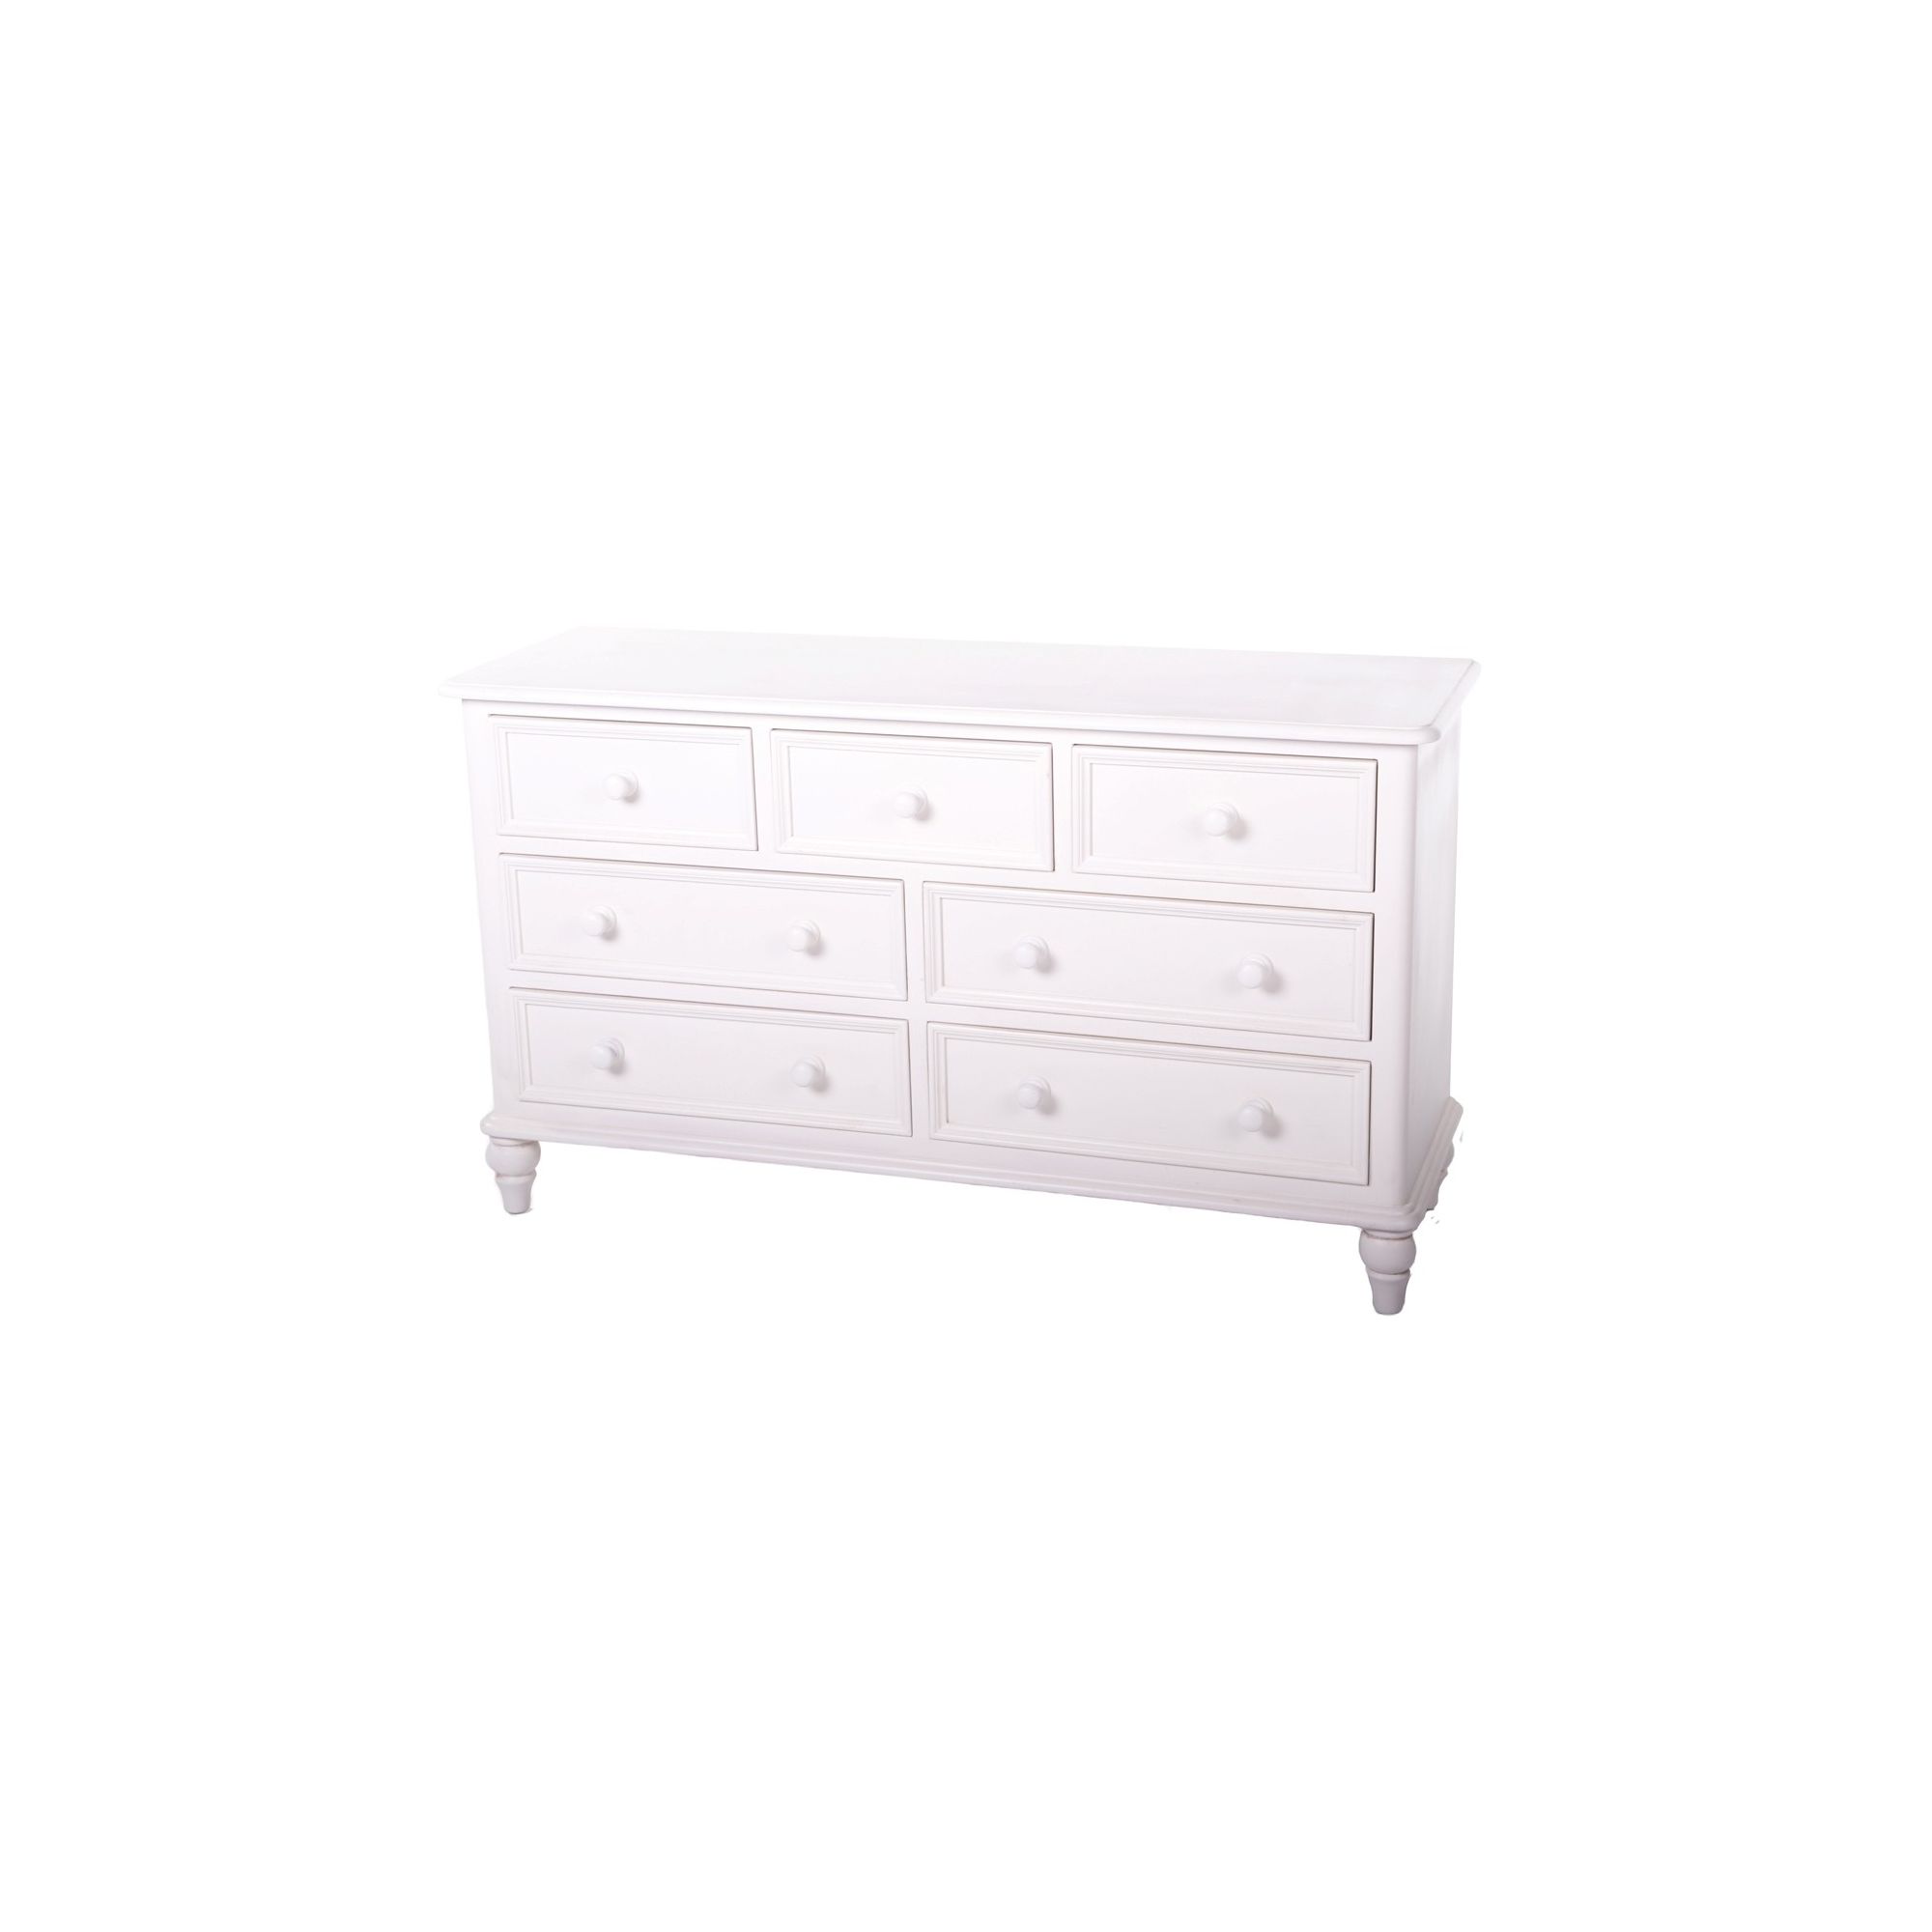 Thorndon Brittany 3 Over 4 Drawer Chest in Antique White at Tesco Direct